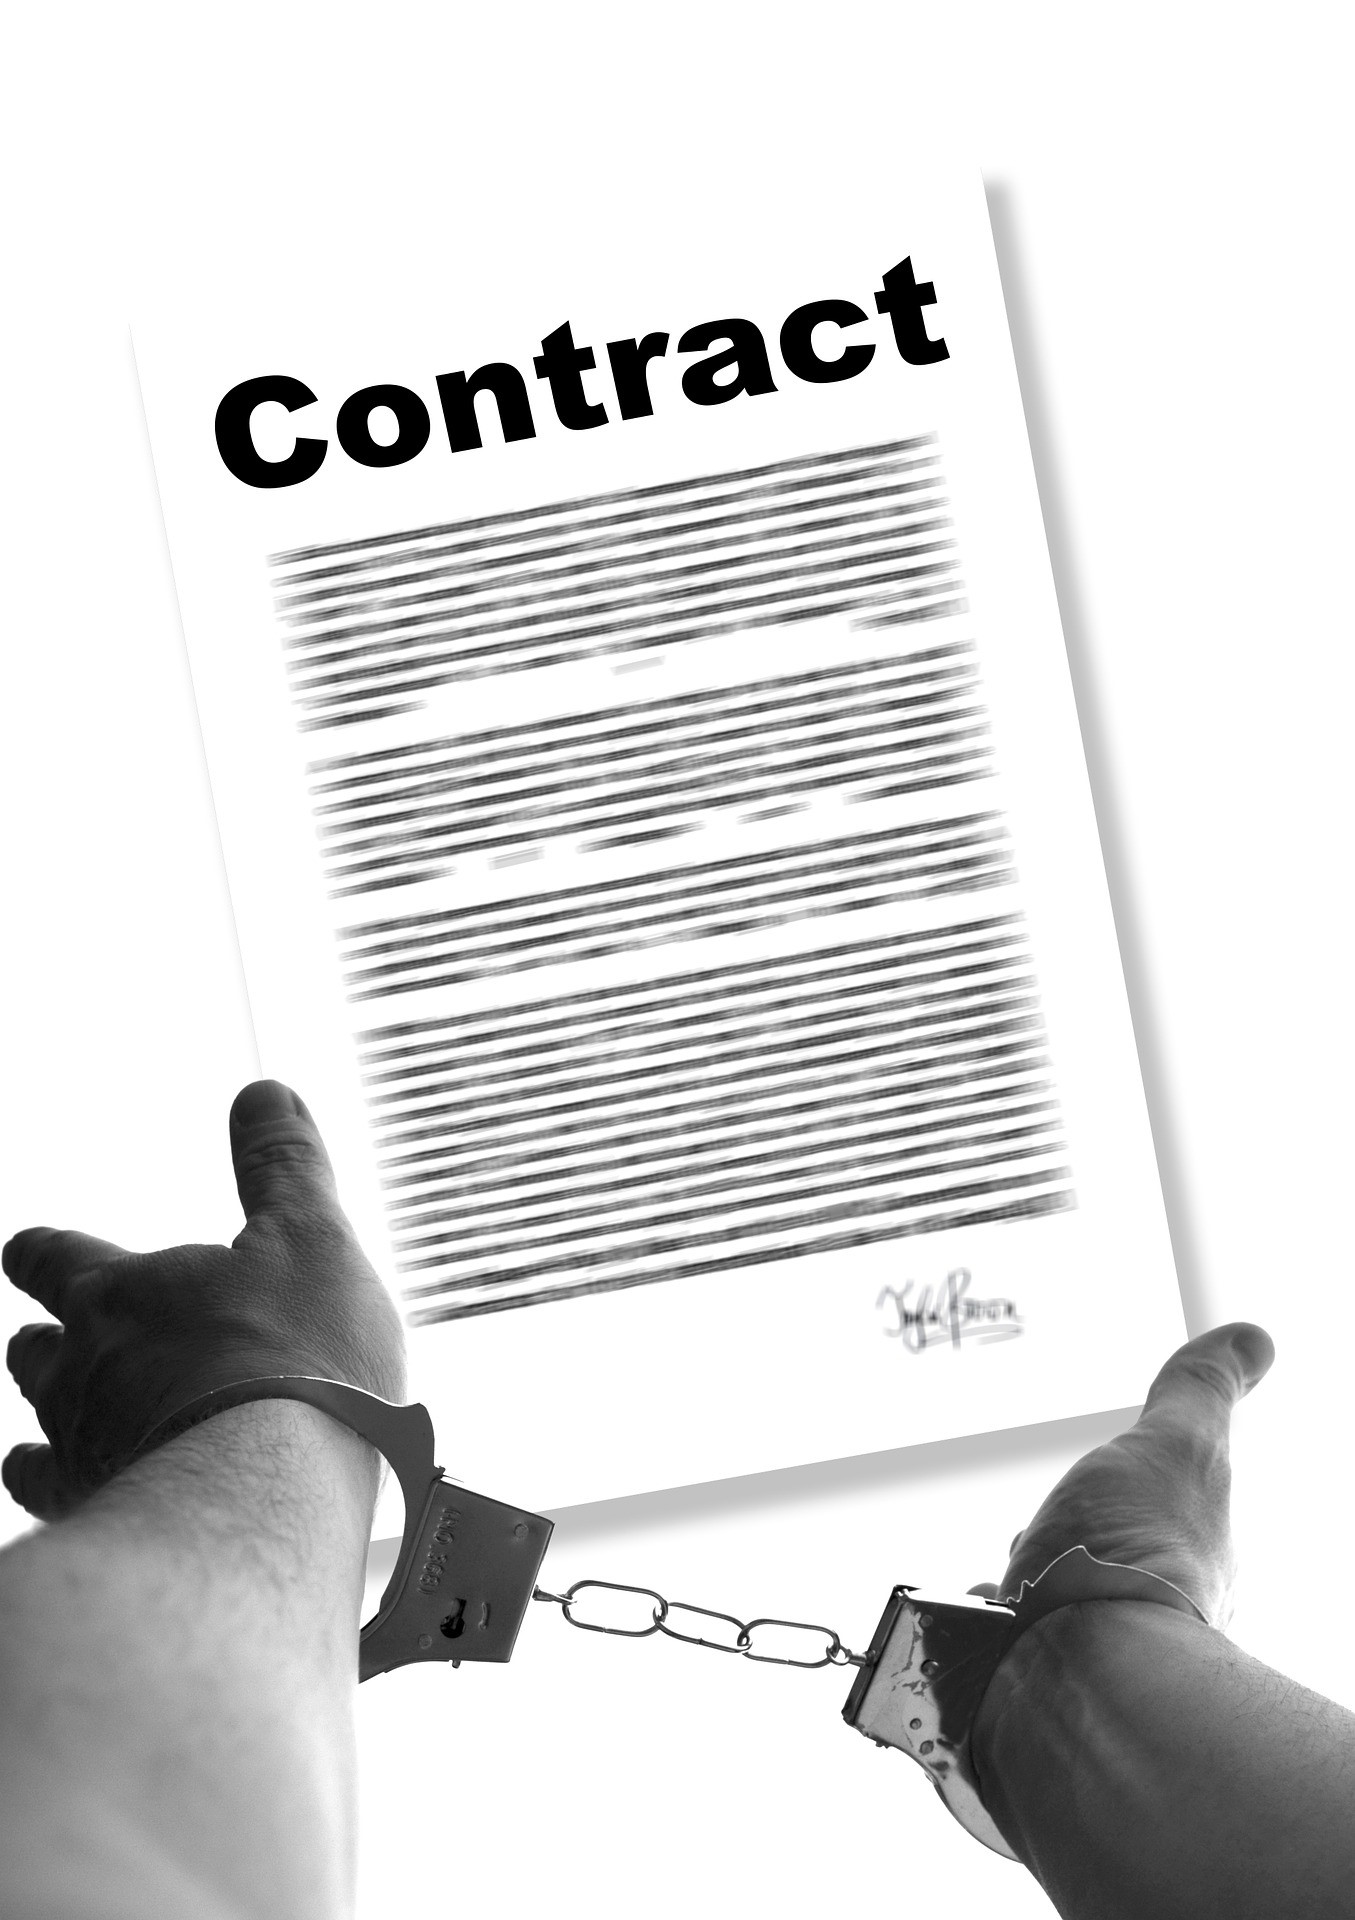 contract-1229856_1920